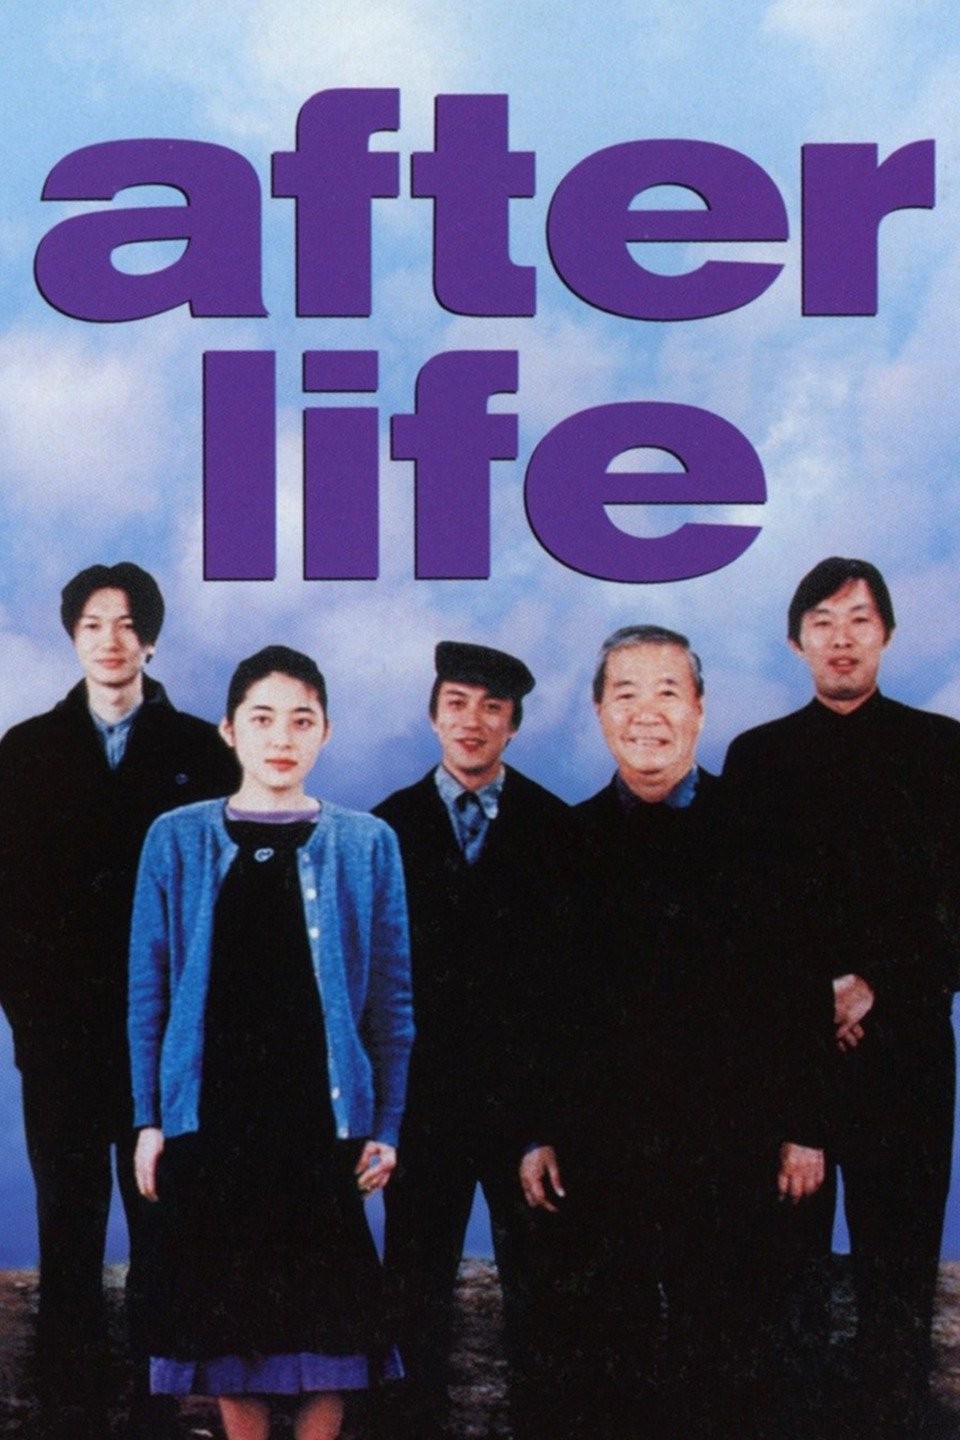 After Life - Rotten Tomatoes